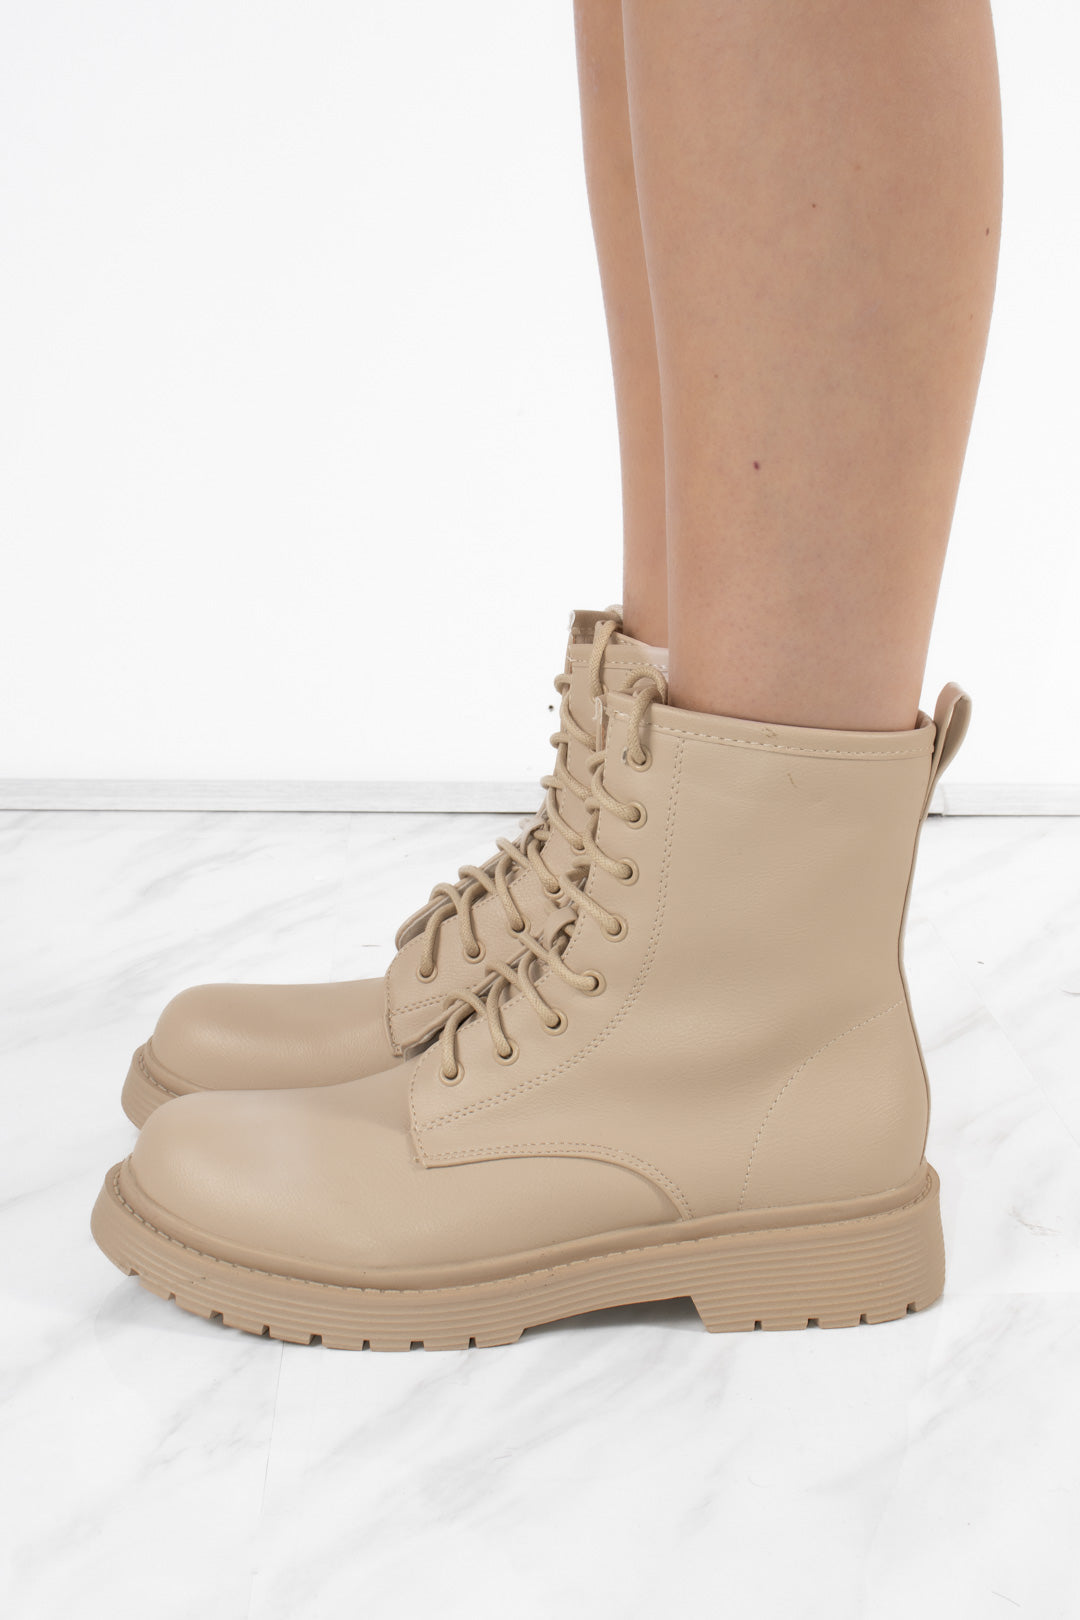 Load image into Gallery viewer, Beige Lace Up Short Chelsea Platform Ankle Boots
